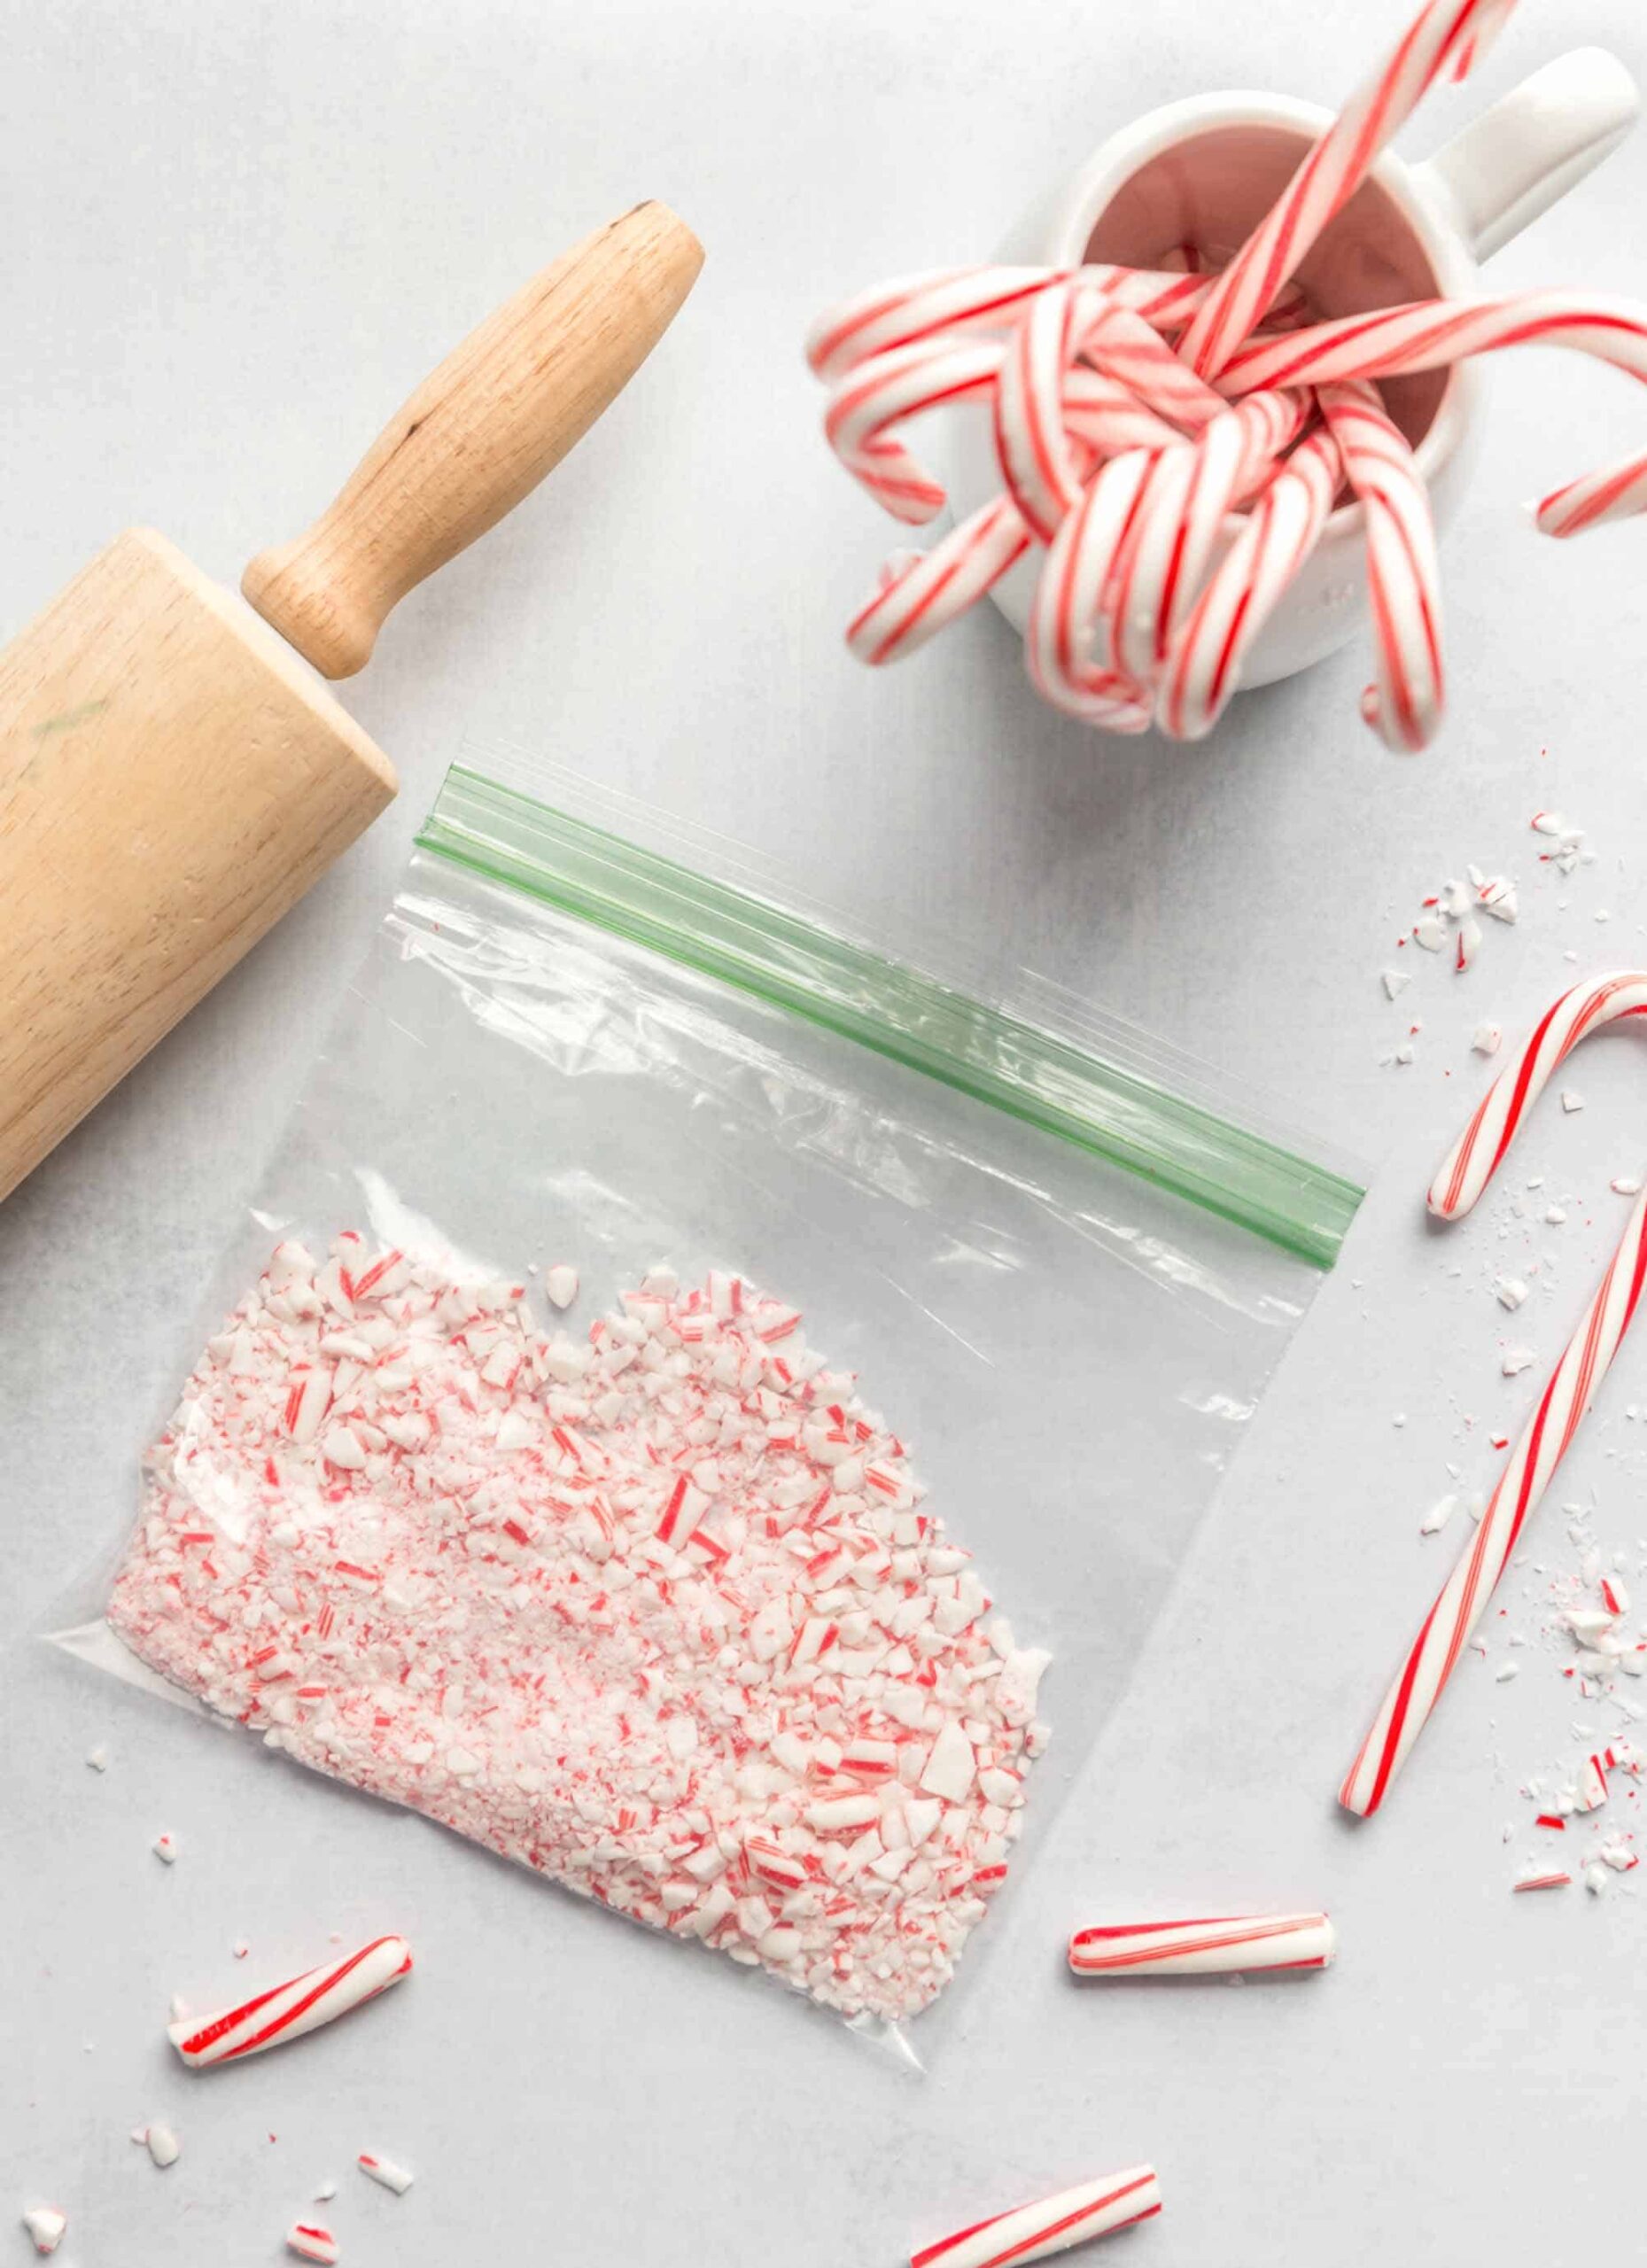 Crushed Candy Canes in a Bag Photo